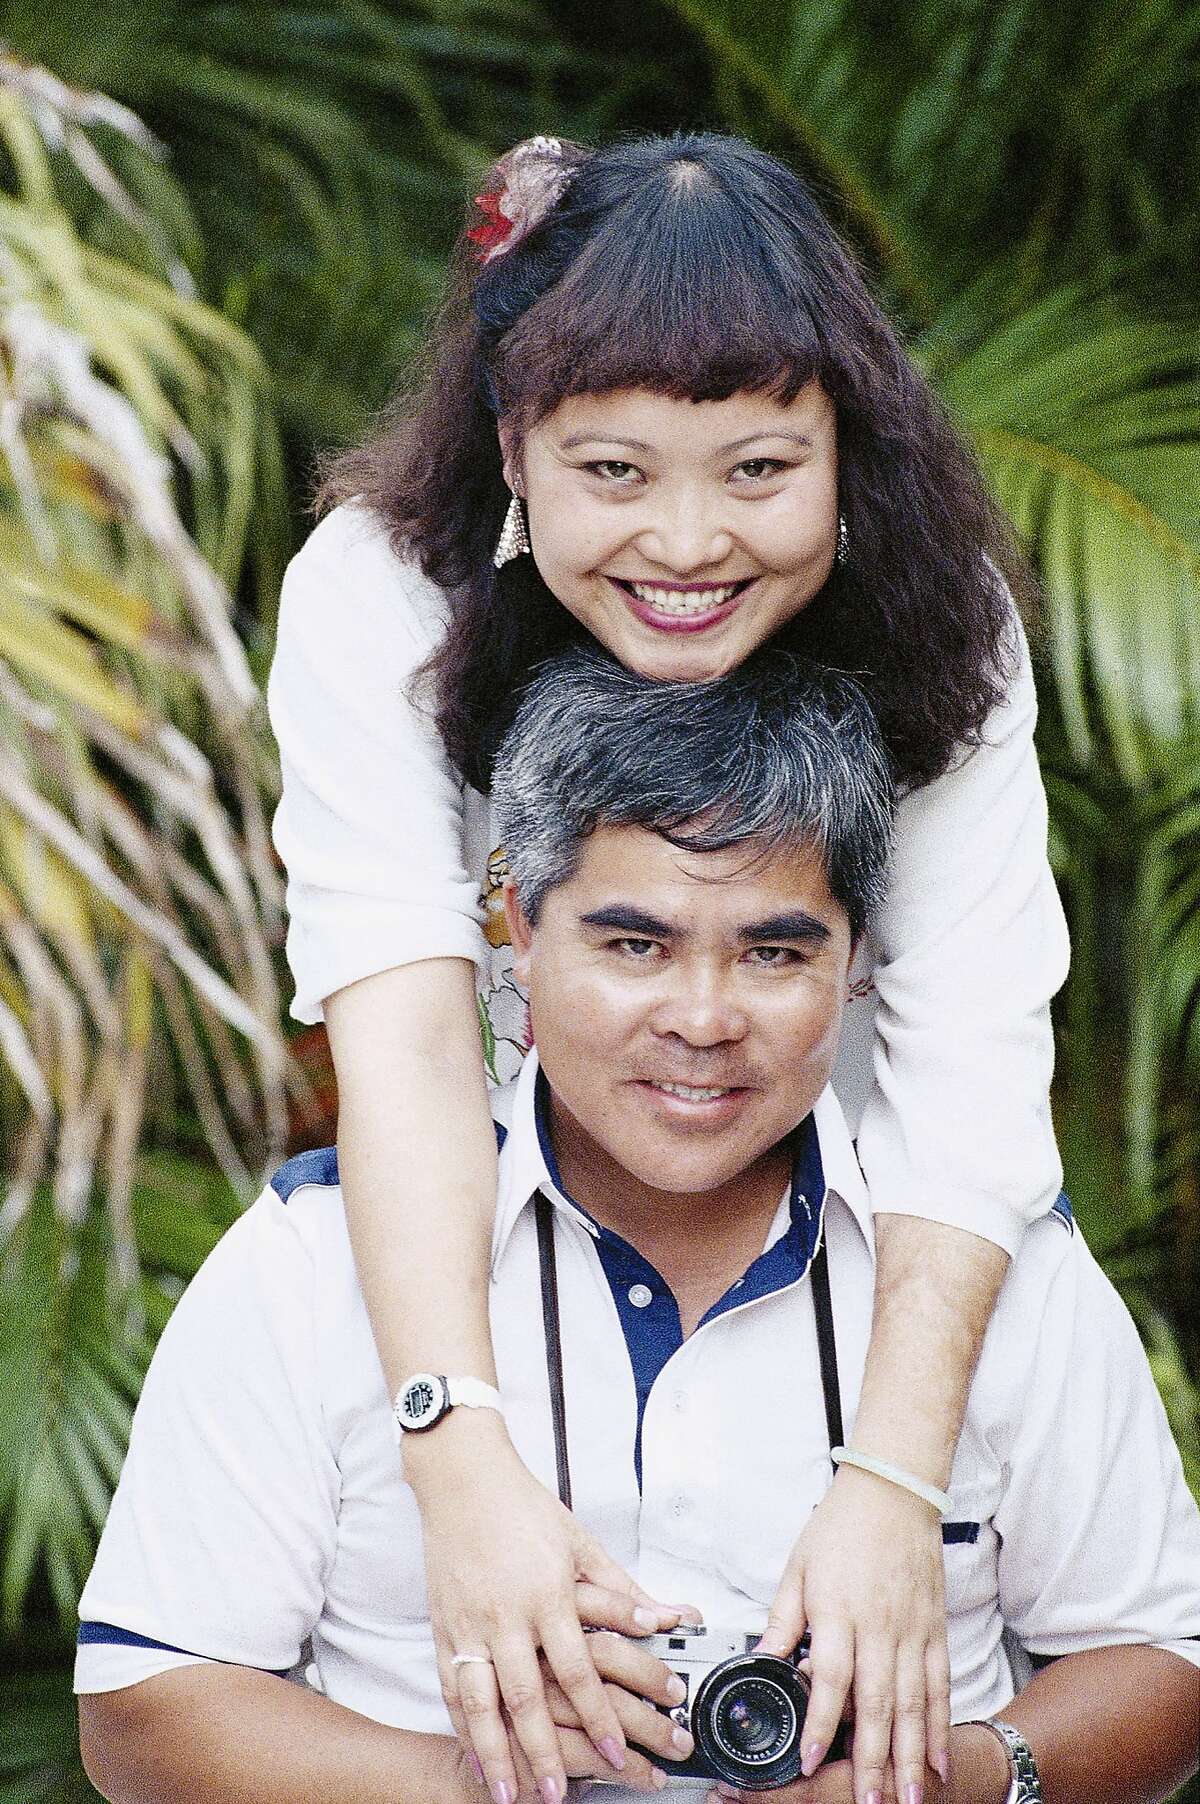 FILE - In this Aug. 17, 1989 file photo, Phan Thi Kim Phuc embraces Associated Press staff photographer Nick Ut during a reunion in Havana, Cuba. It only took a second for Ut to snap the iconic black-and-white image of her after a napalm attack in 1972. It communicated the horrors of the Vietnam War in a way words could never describe, helping to end one of America's darkest eras. But beneath the photo lies a lesser-known story. It's the tale of a dying child brought together by chance with a young photographer. A moment captured in the chaos of war that would serve as both her savior and her curse on a journey to understand life's plan for her. (AP Photo/Jim Caccavo)